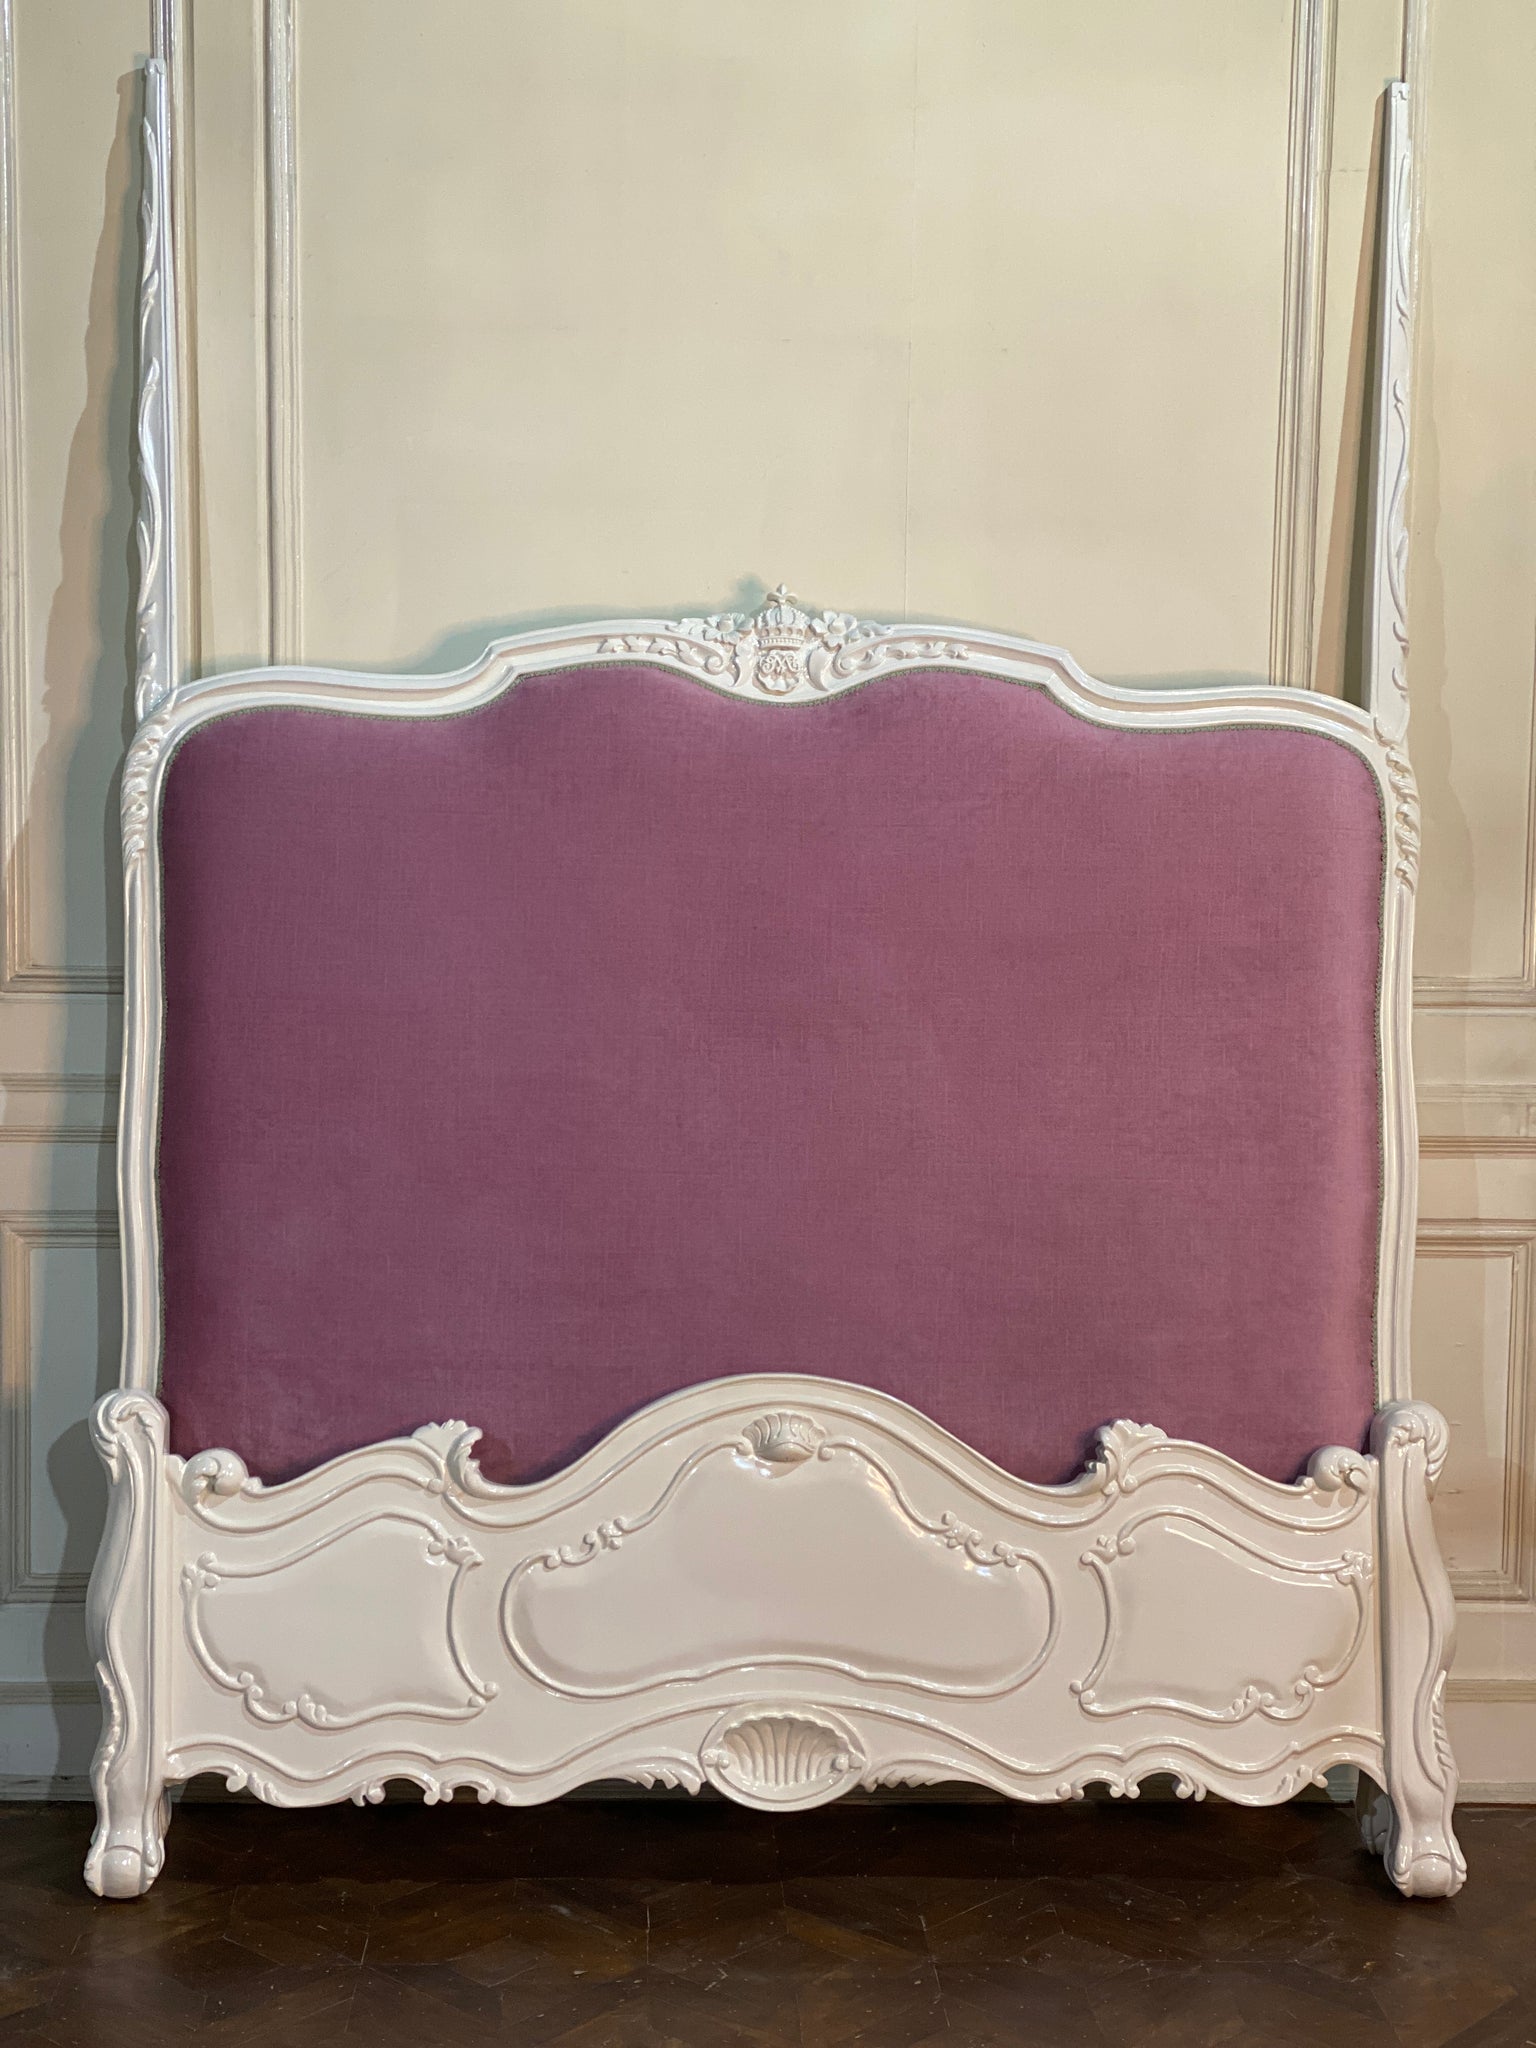 Louis XV bed with elegant silhouette